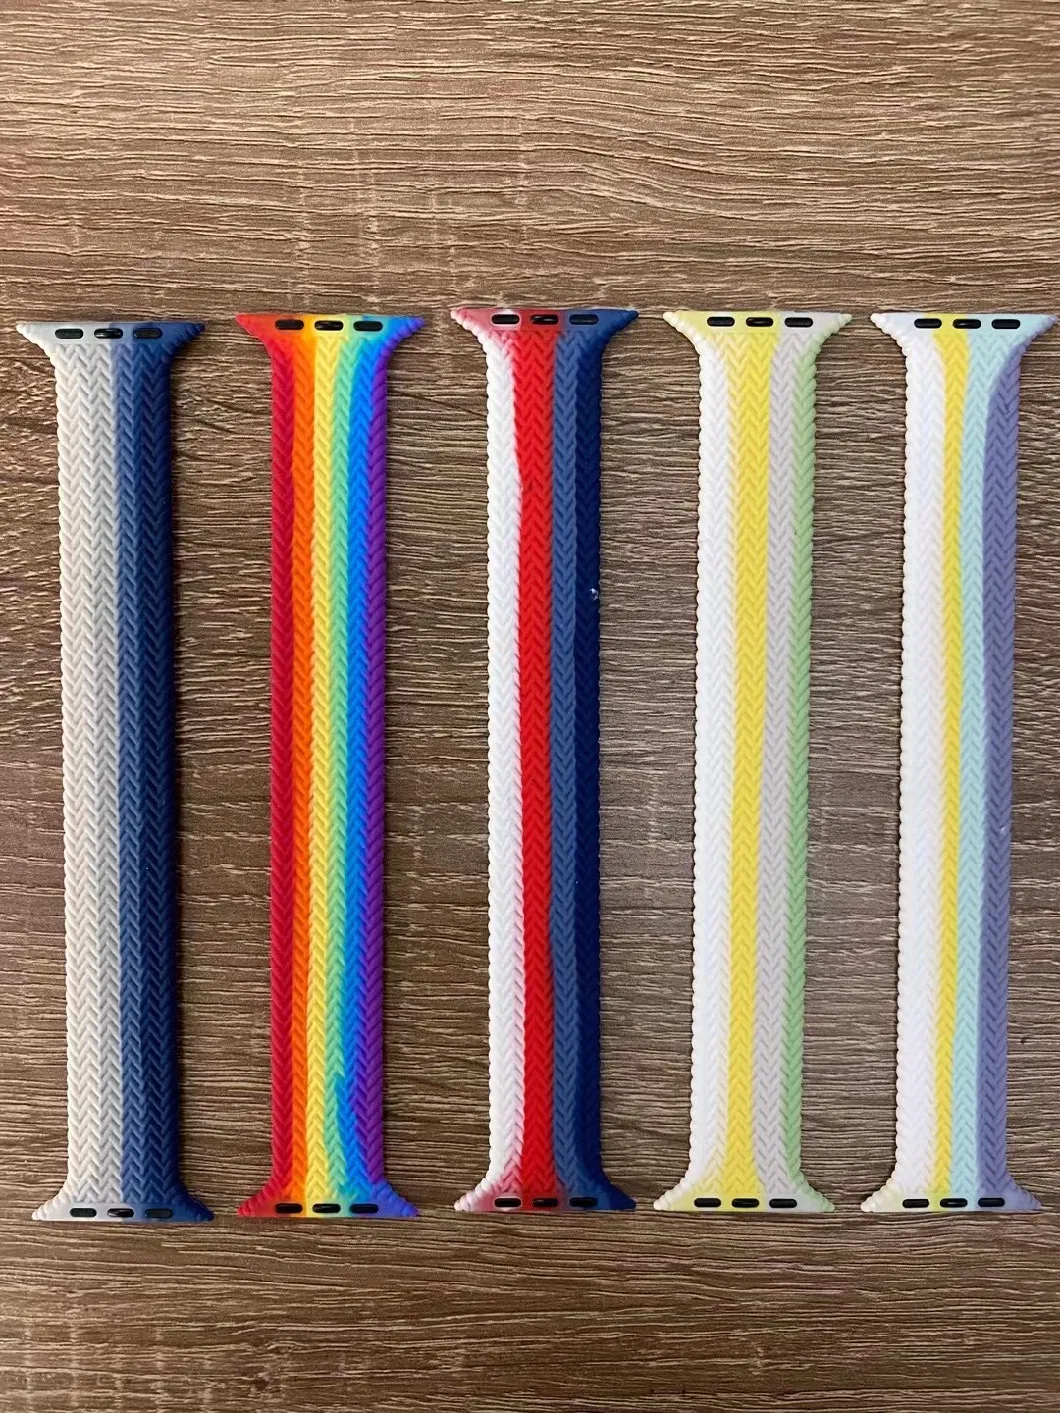 Wholesale Multicolor Customize Waterproof Rainbow Color Replacement Sport Silicone Watch Band Rubber Watch Strap for Watch